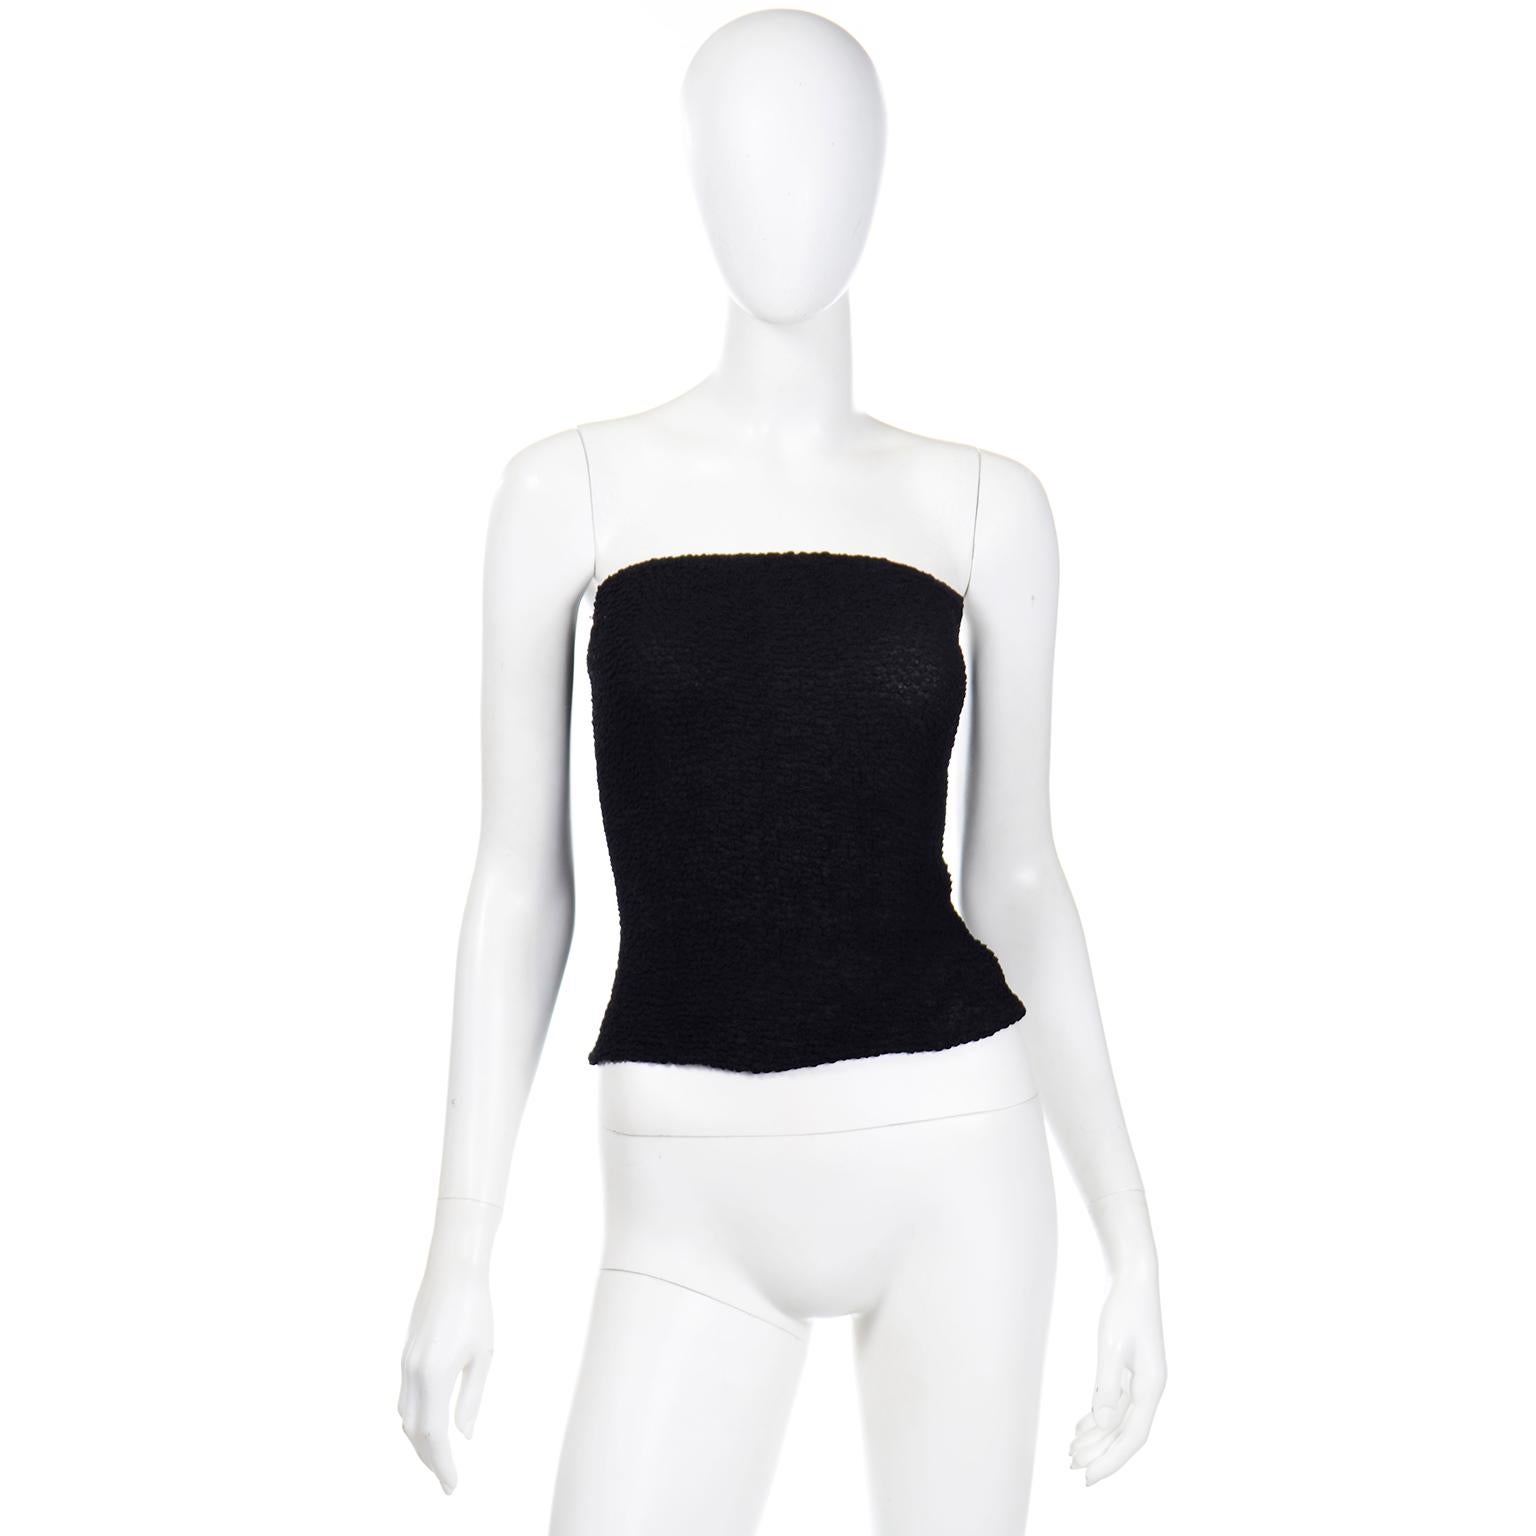 This is a 1970's vintage Halston black puckered elastic tube top. It has really unique elastic veins along the inside of the fabric that create a unique puckered effect on the reversed side. The top of the tube top has a thick elastic band to secure